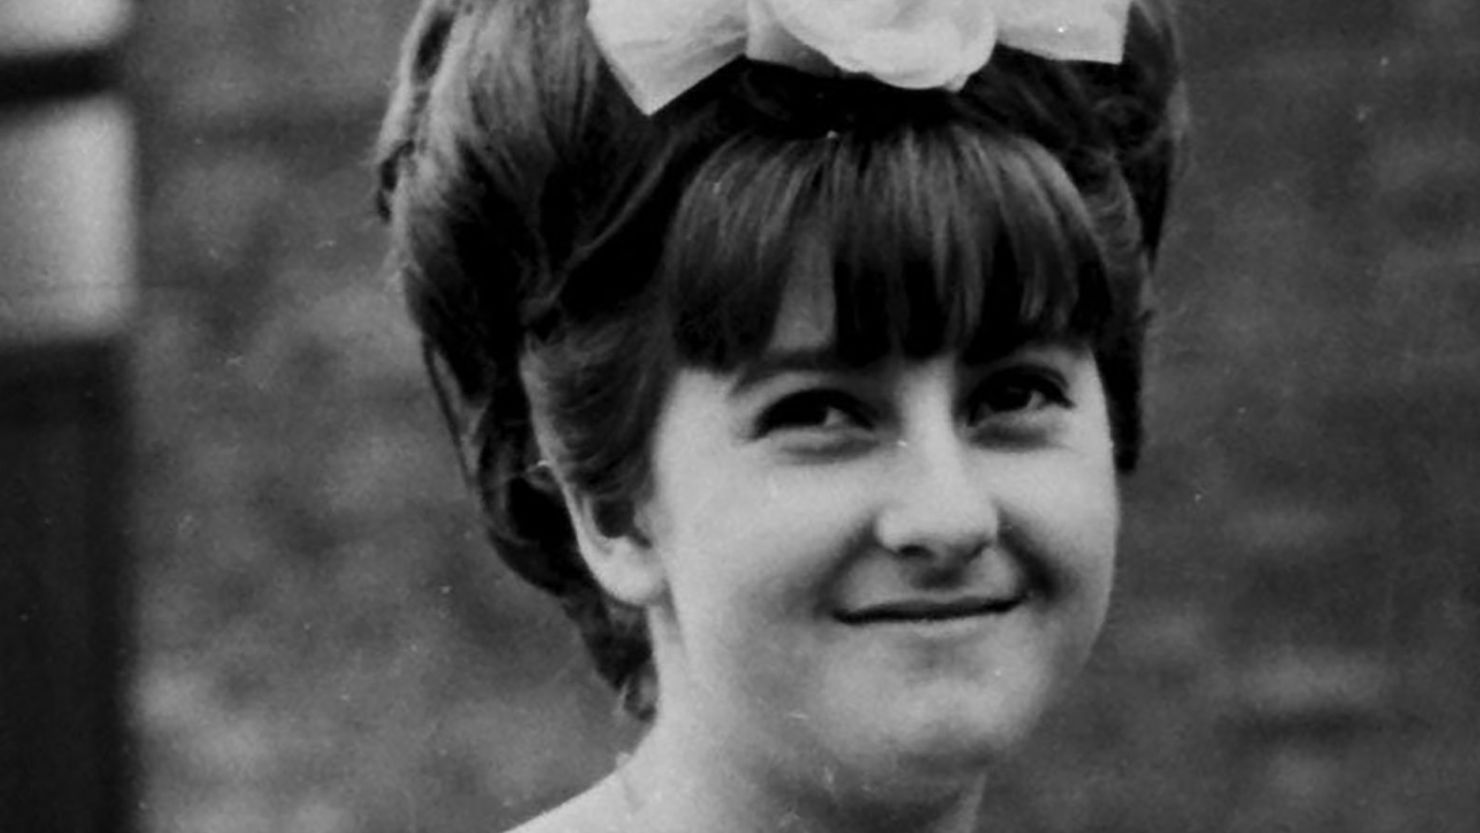 Mary Bastholm was 15 when she went missing in 1968.